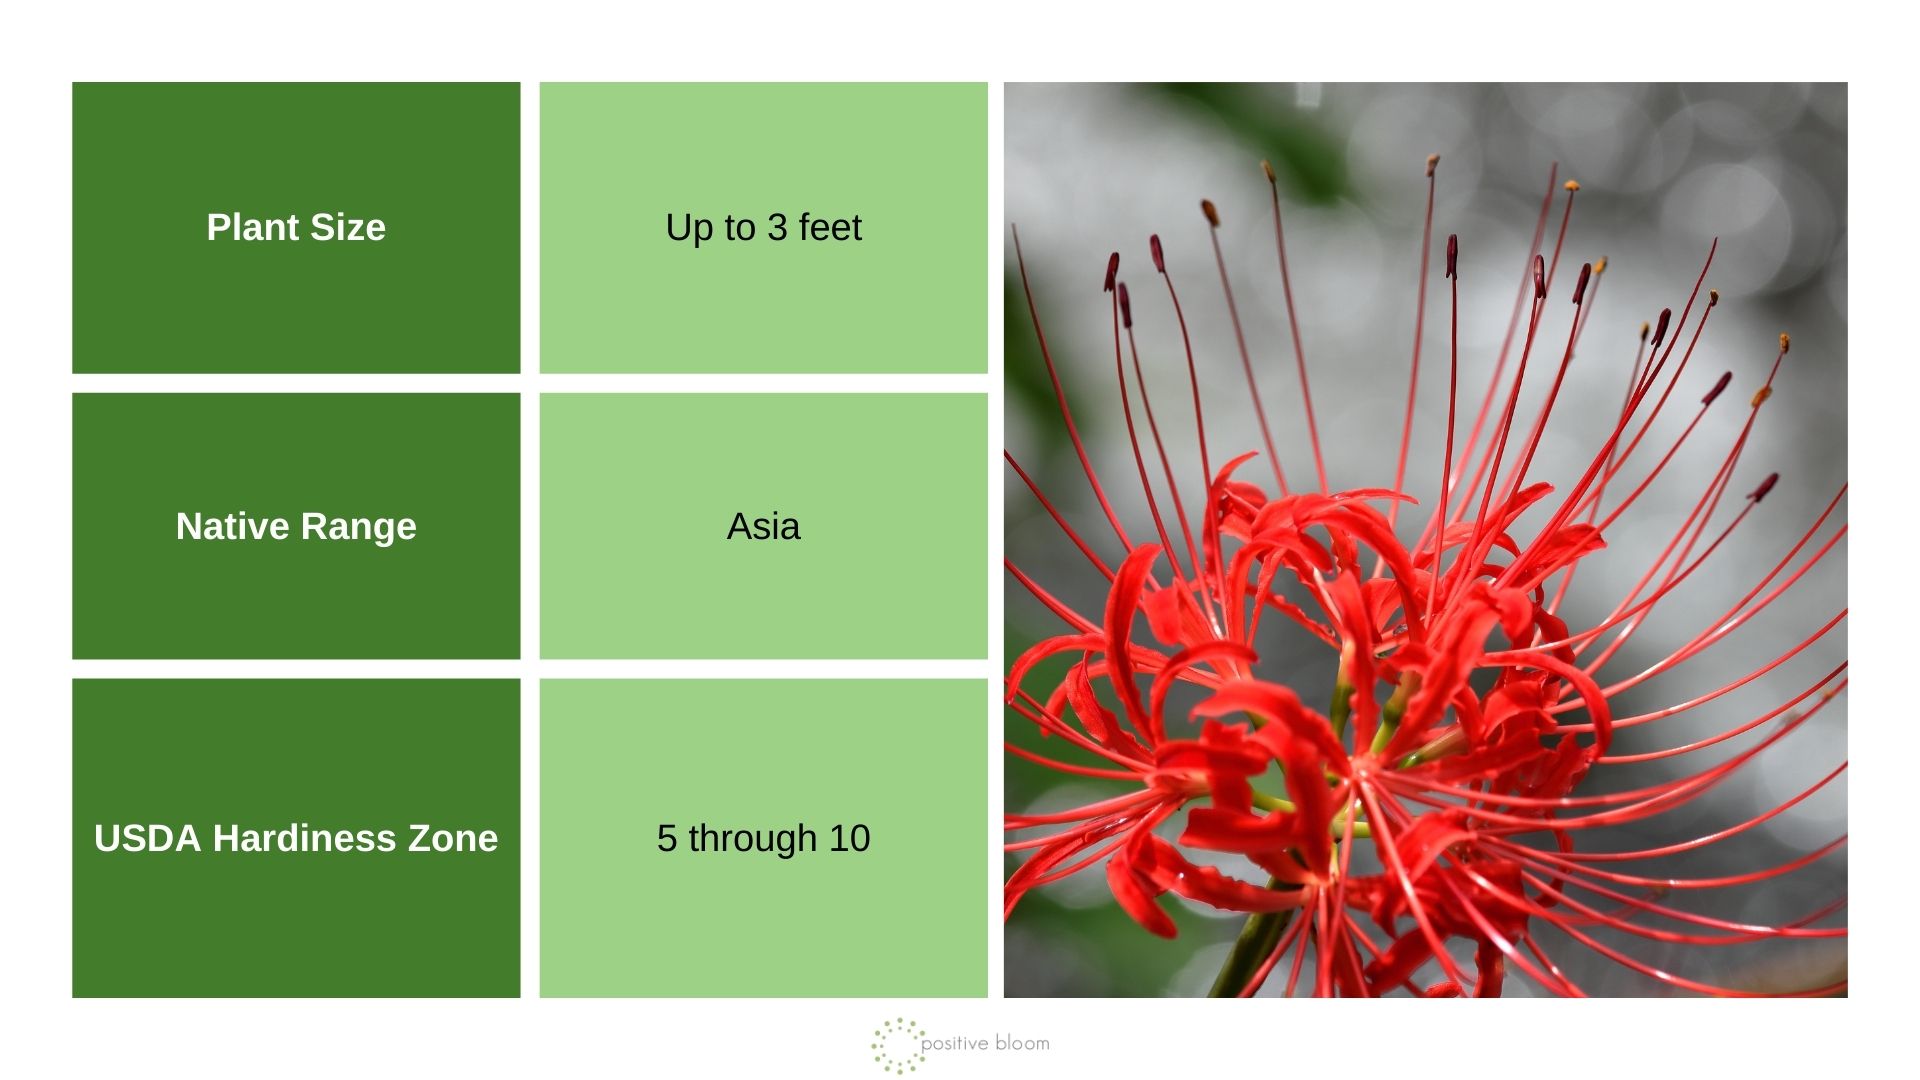 Spider Lily info chart and photo